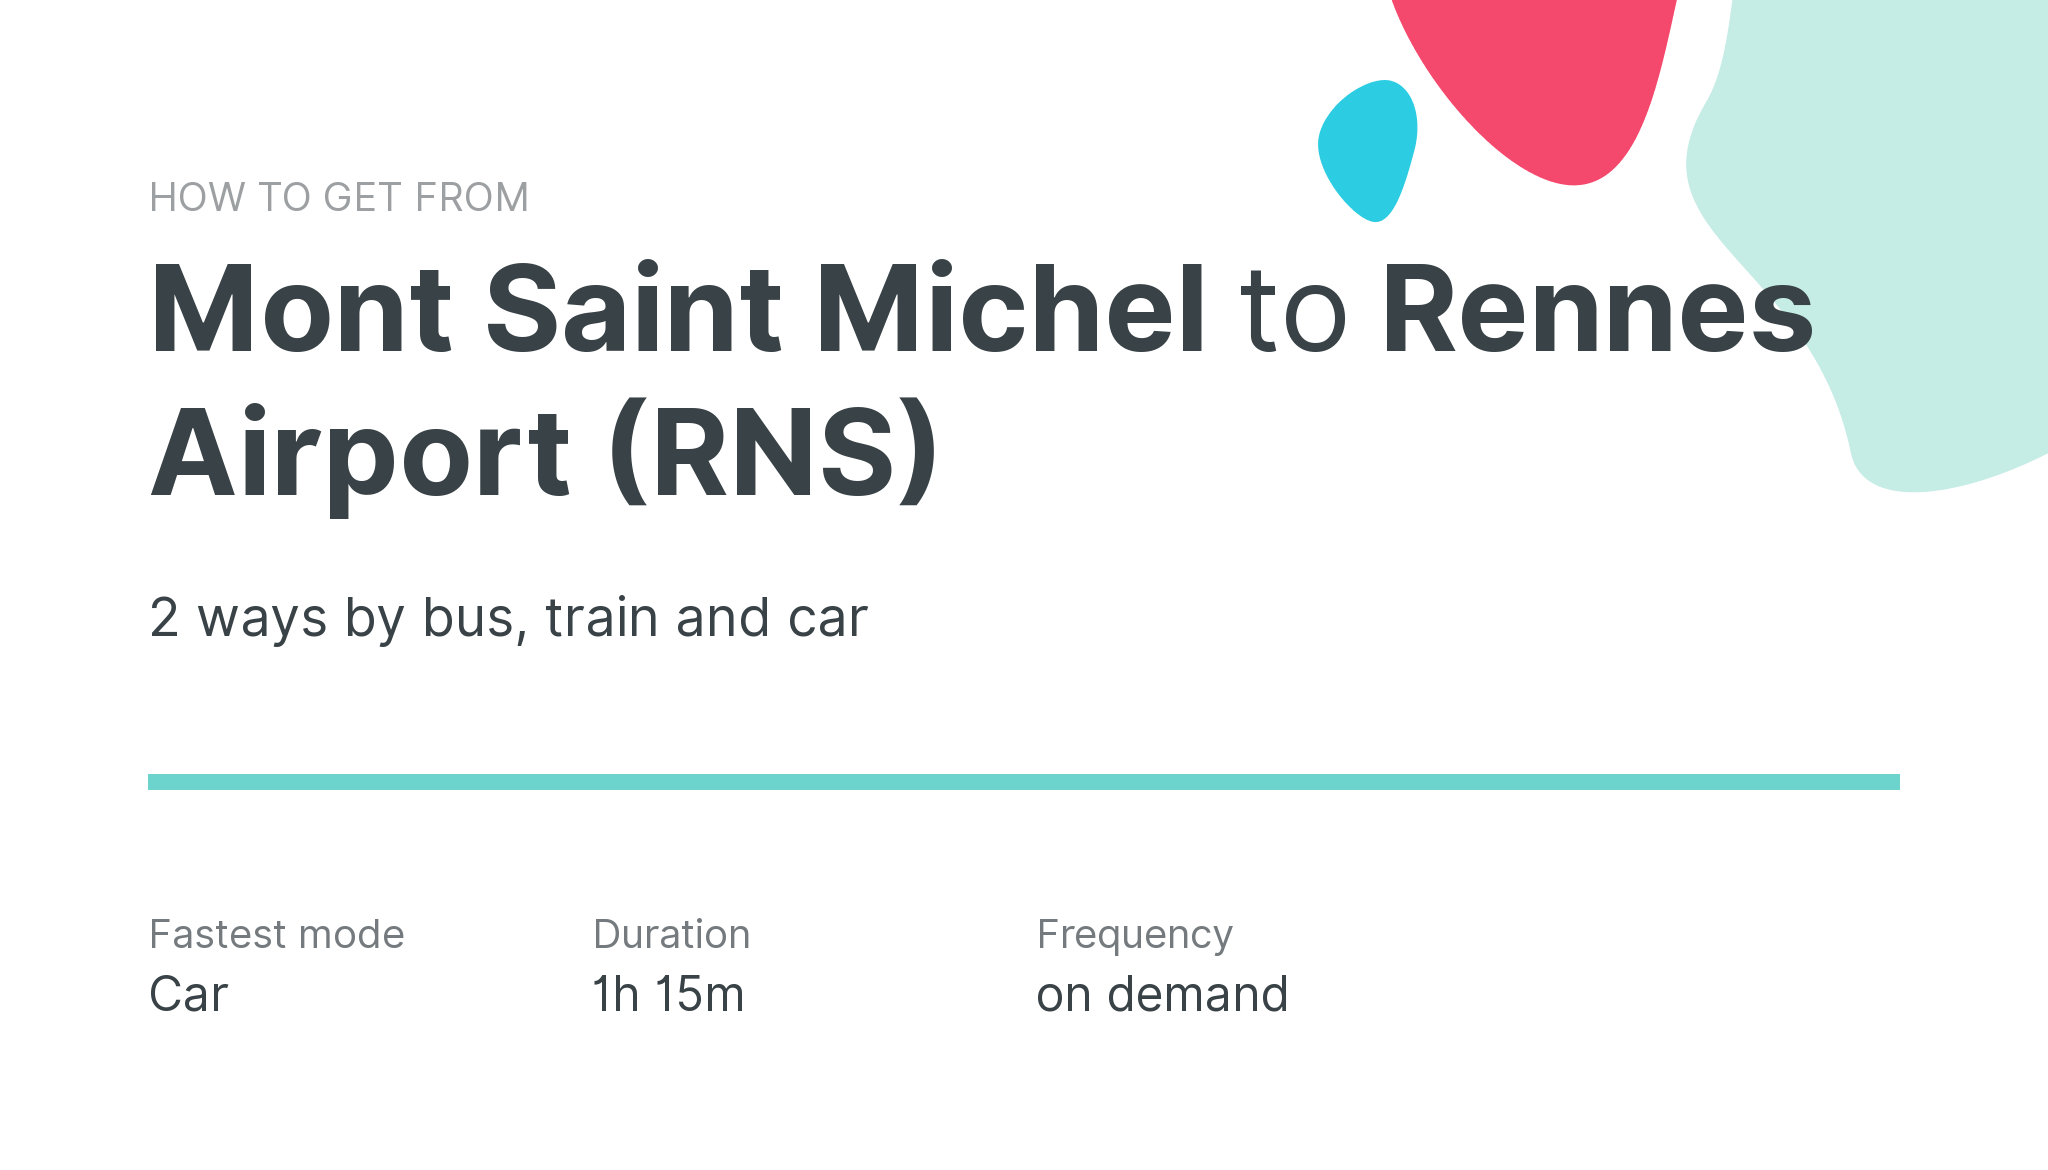 How do I get from Mont Saint Michel to Rennes Airport (RNS)